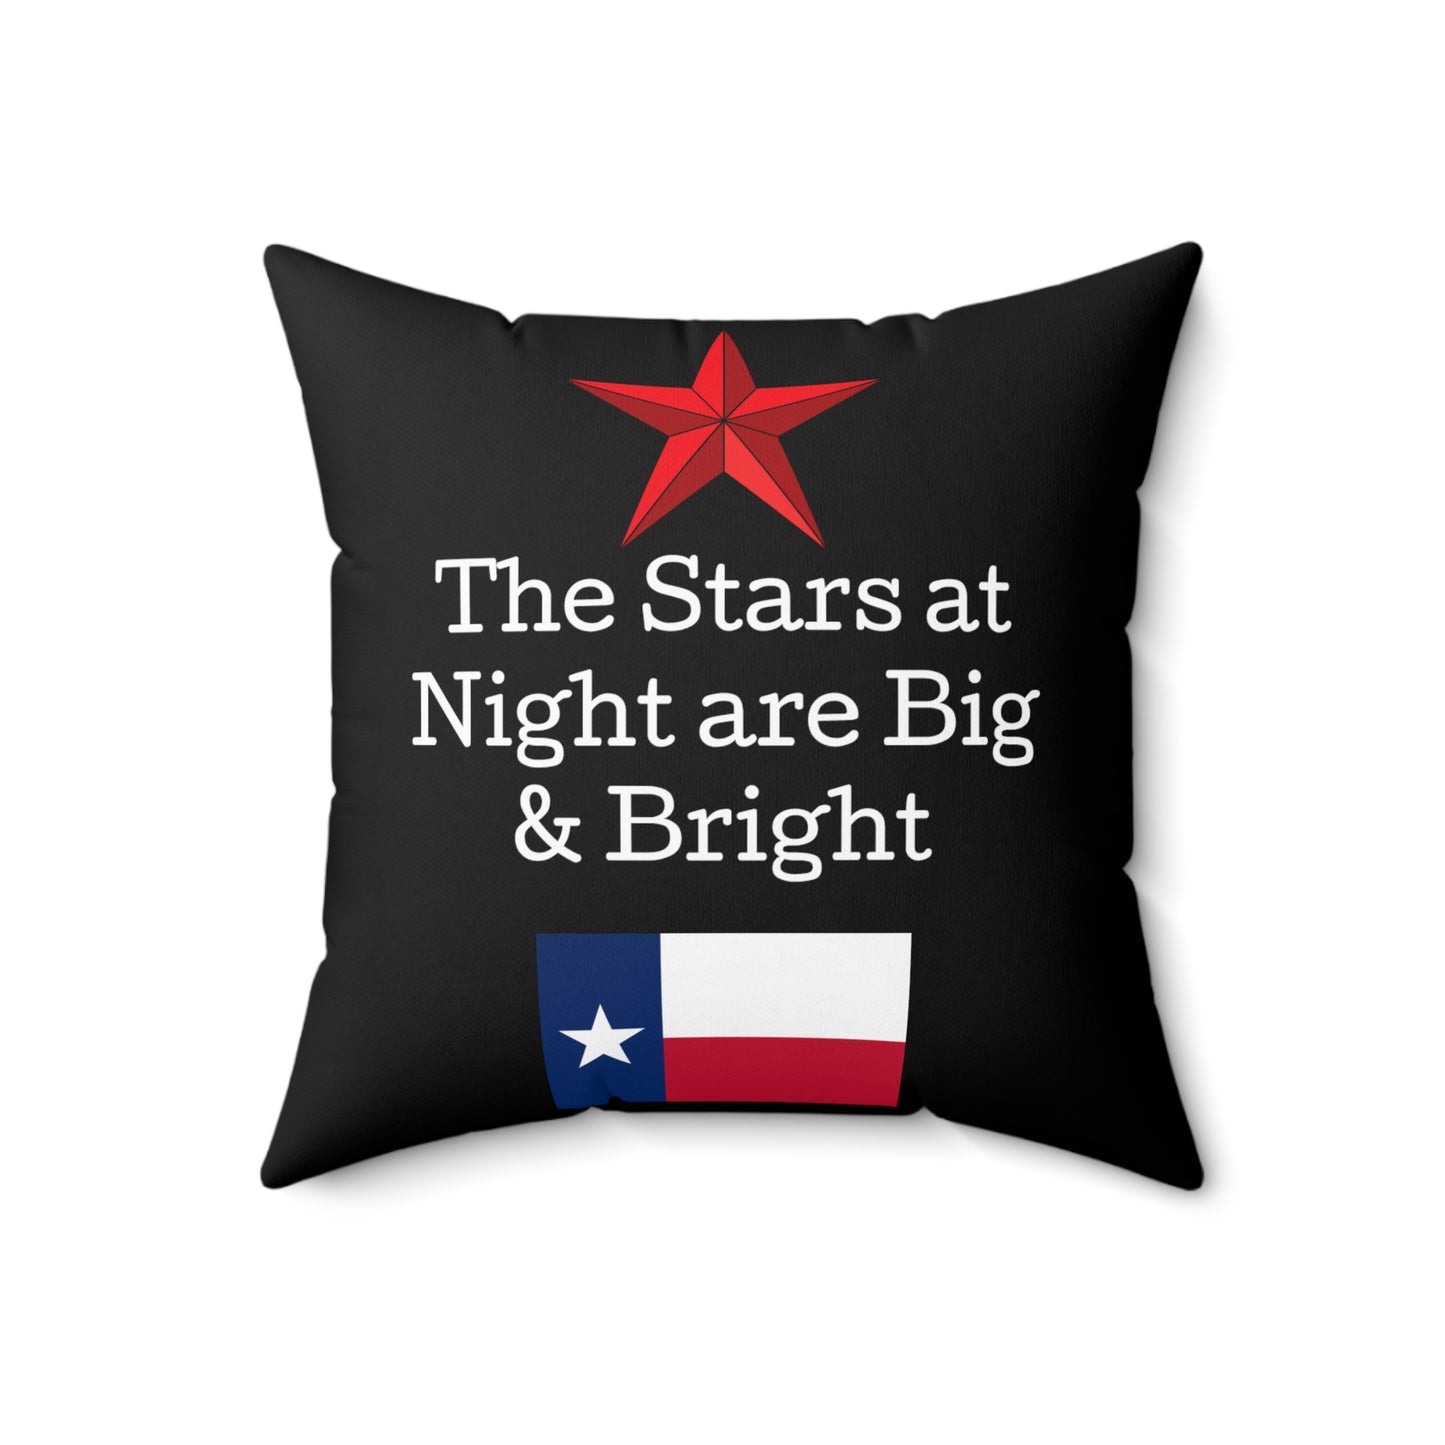 Deep in the Heart of Texas Spun Polyester Square Pillow